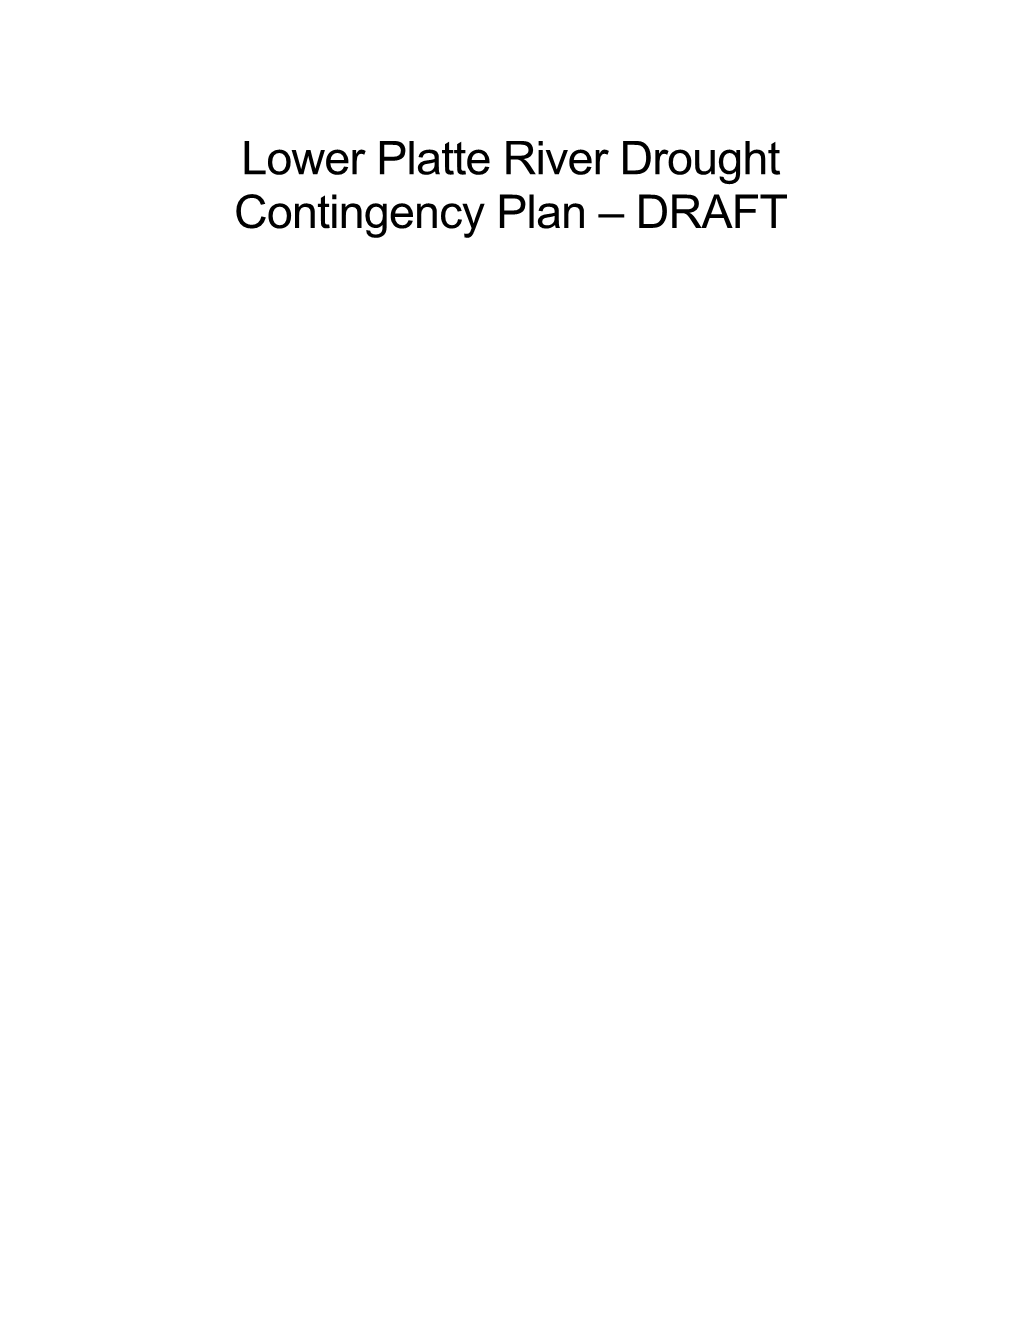 Lower Platte River Drought Contingency Plan – DRAFT Lower Platte River Drought Contingency Plan – DRAFT Executive Summary